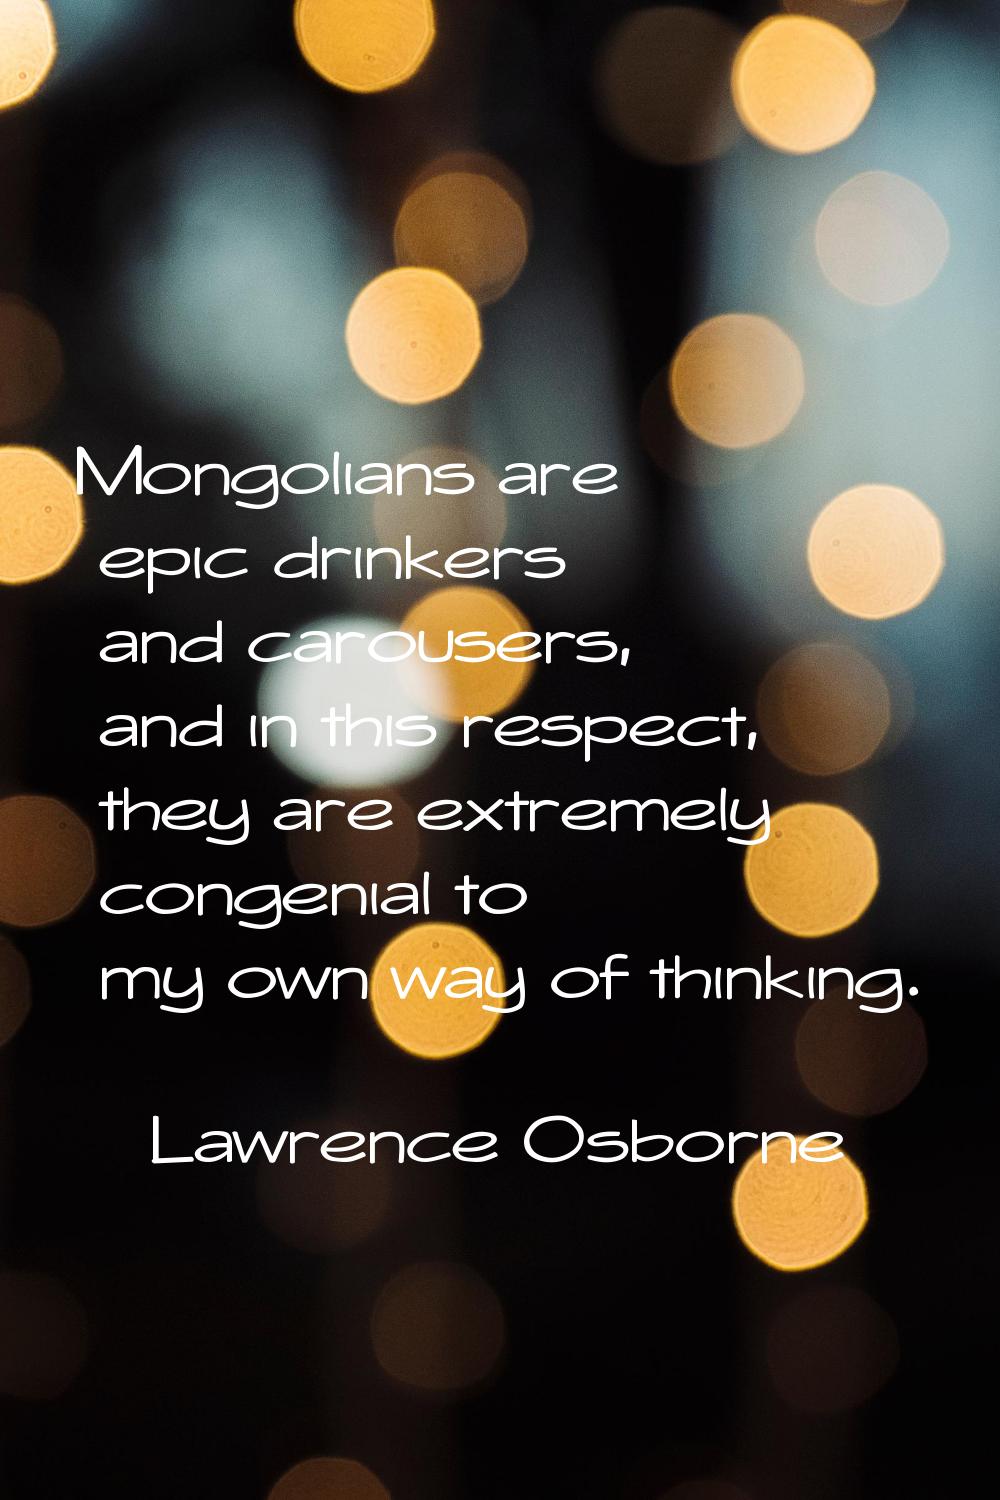 Mongolians are epic drinkers and carousers, and in this respect, they are extremely congenial to my